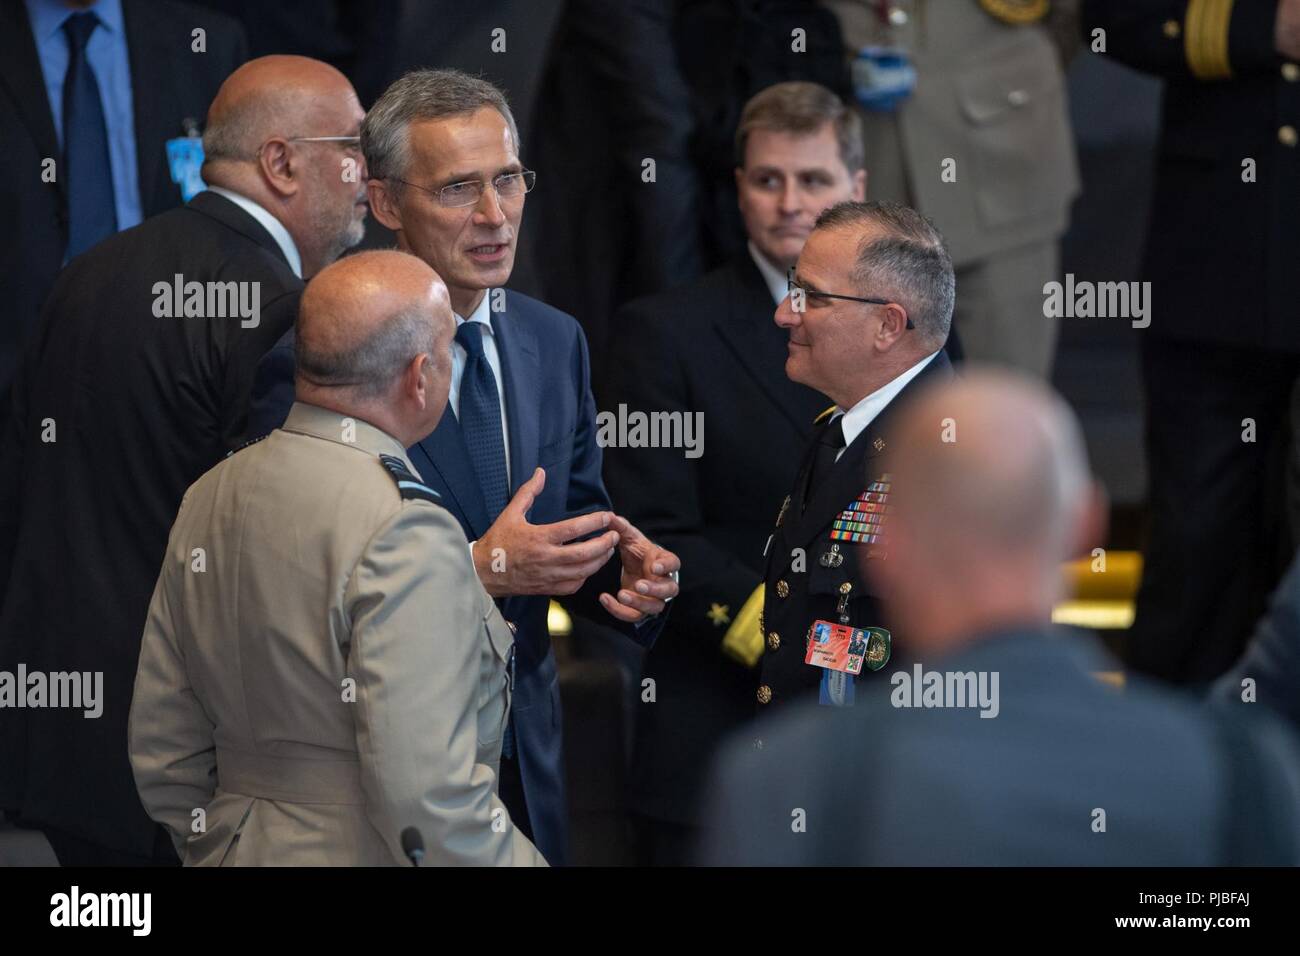 General Curtis M. Scaparrotti, Supreme Allied Commander Europe, chats with Jens Stoltenberg, NATO Secretary General, and Air Chief Marshal Sir Stuart Peach, Chairman of the NATO Military Committee, during the Brussels Summit at NATO HQ, Brussels, Belgium, July 11, 2018. General Scaparrotti attended the Brussels Summit to provide military guidance to the North Atlantic Council and to meet with military and political leadership from throughout the Alliance. (NATO Stock Photo